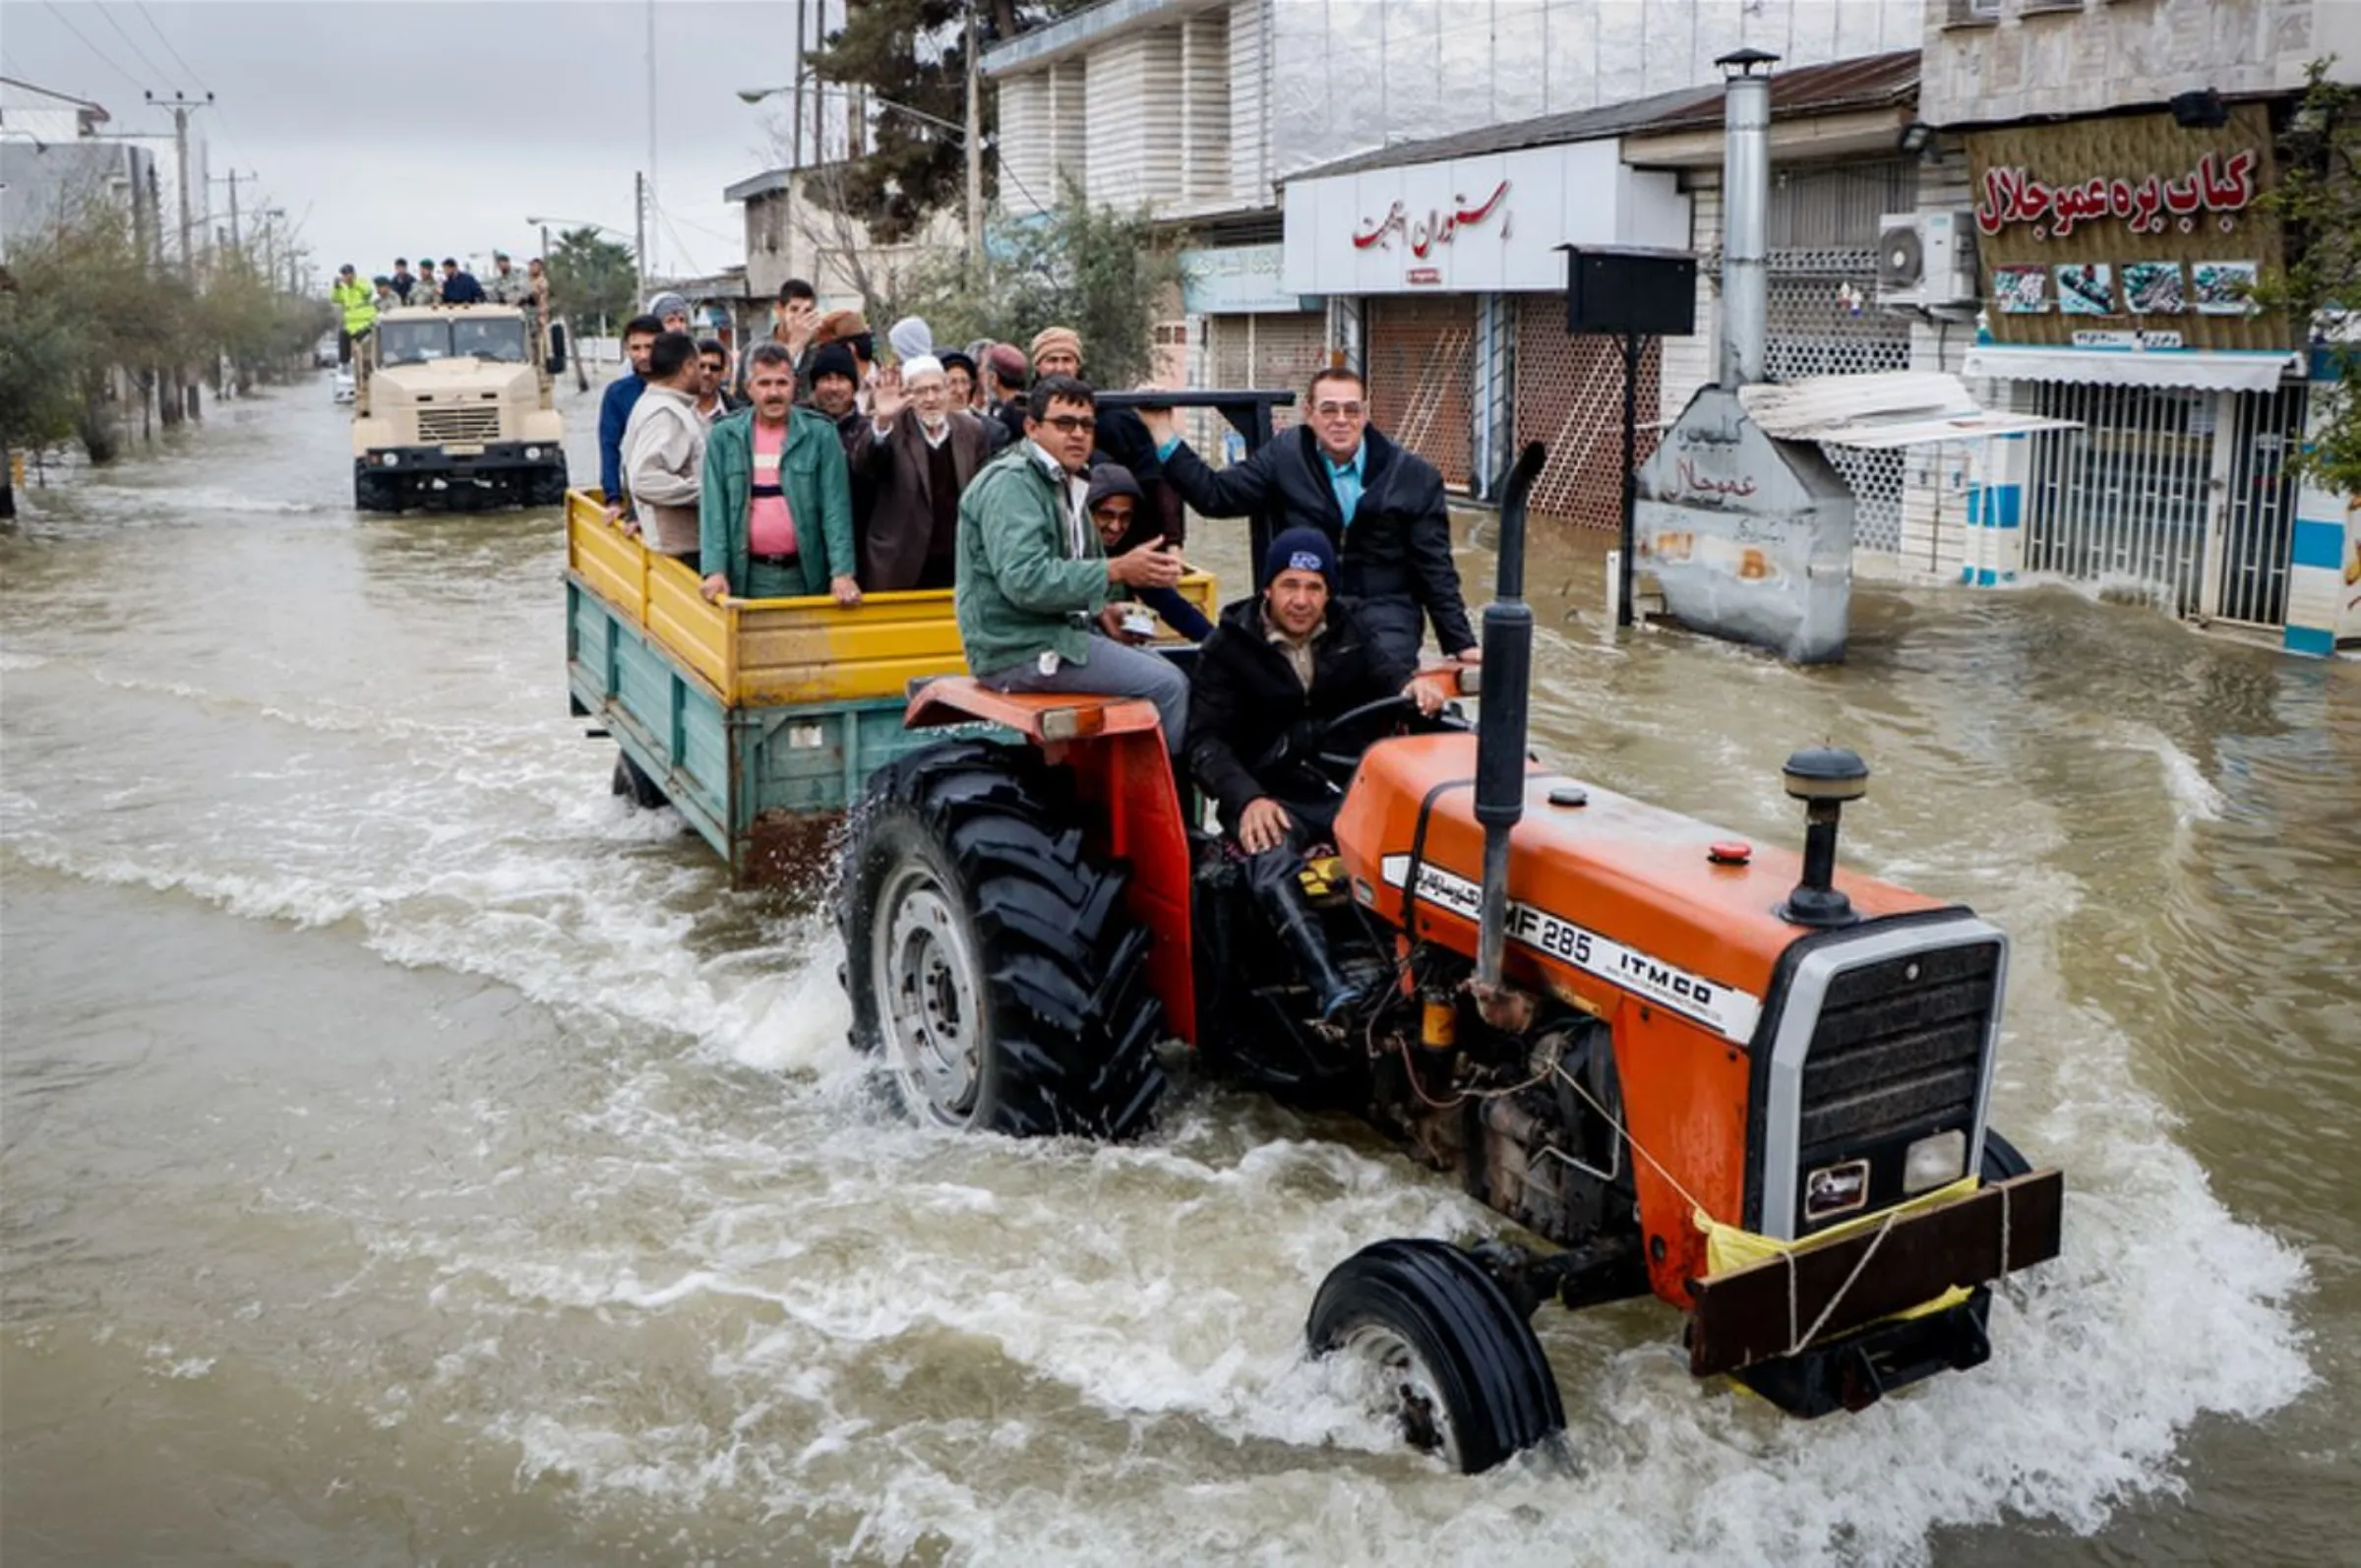 Residents ride a tractor after flash flooding around the northern city of Aq Qala, in Iran’s Golestan province, March 25, 2019. Hossein Esmaeili/Middle East Images via Thomson Reuters Foundation